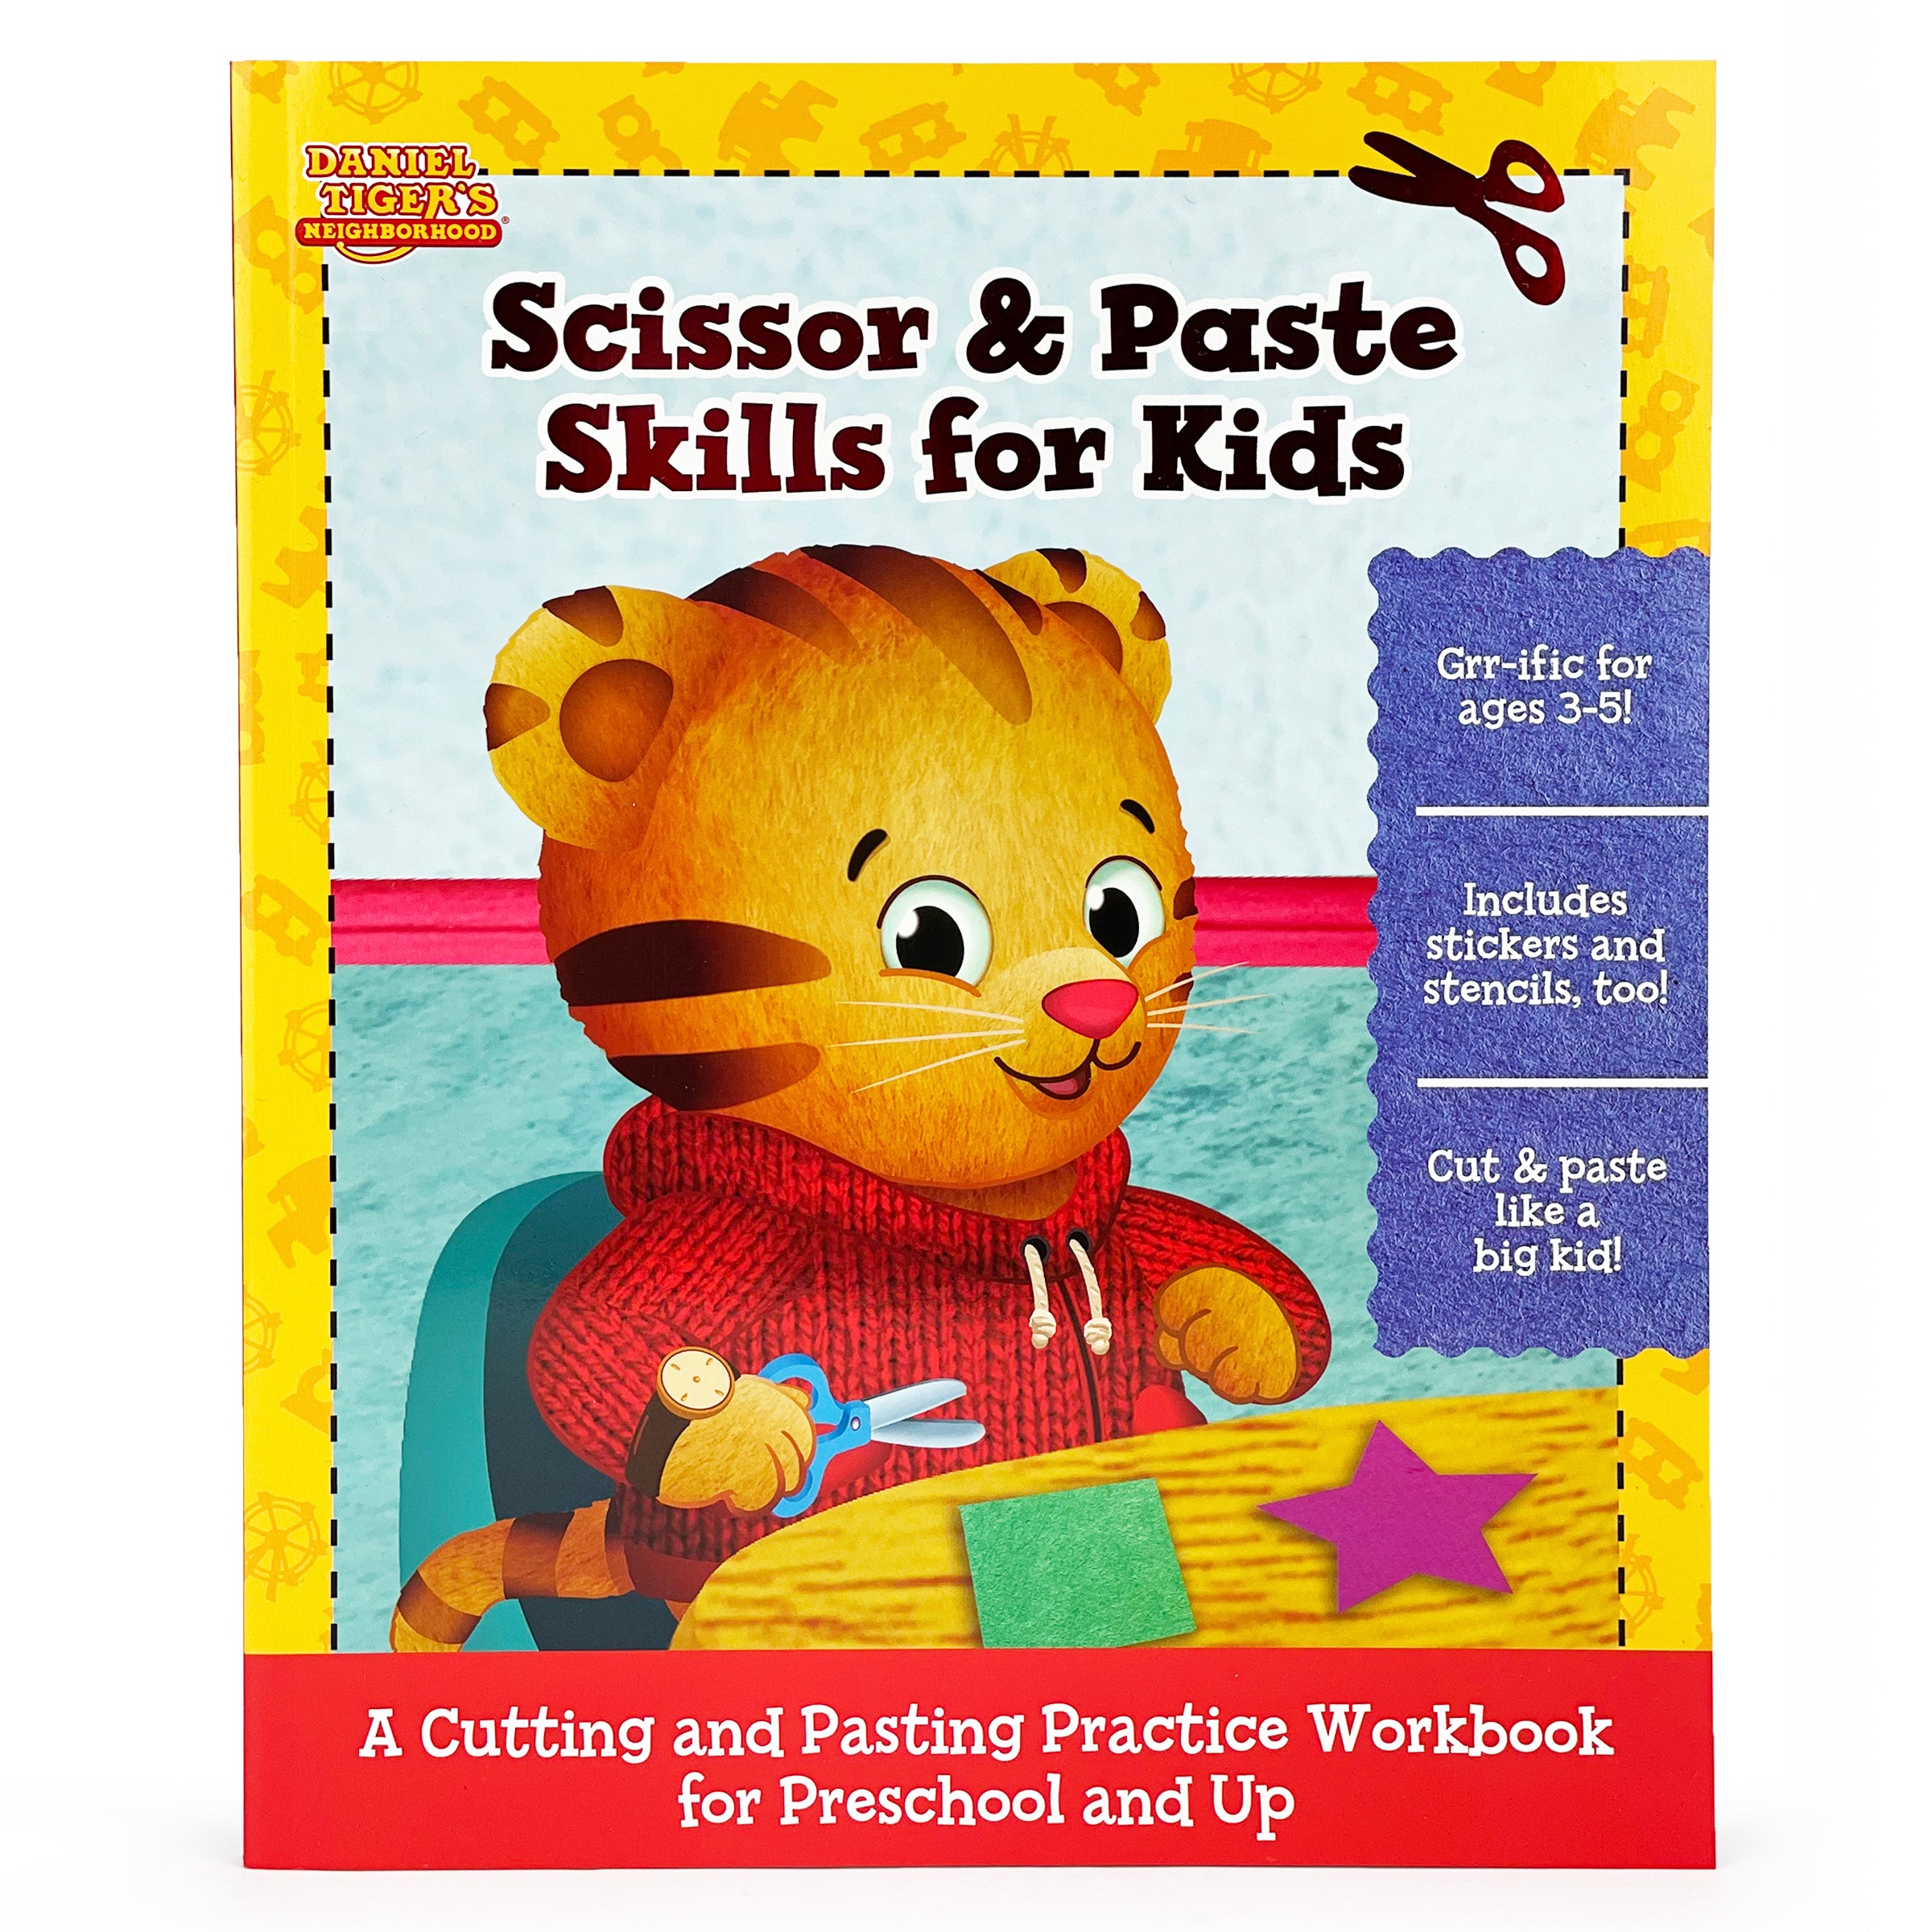 Scissor Skills Activity Book for Kids Ages 3-5: A Fun Cutting Practice Activity Book for Toddlers and Kids Ages 3-5, Scissor Practice for Preschool with Coloring [Book]